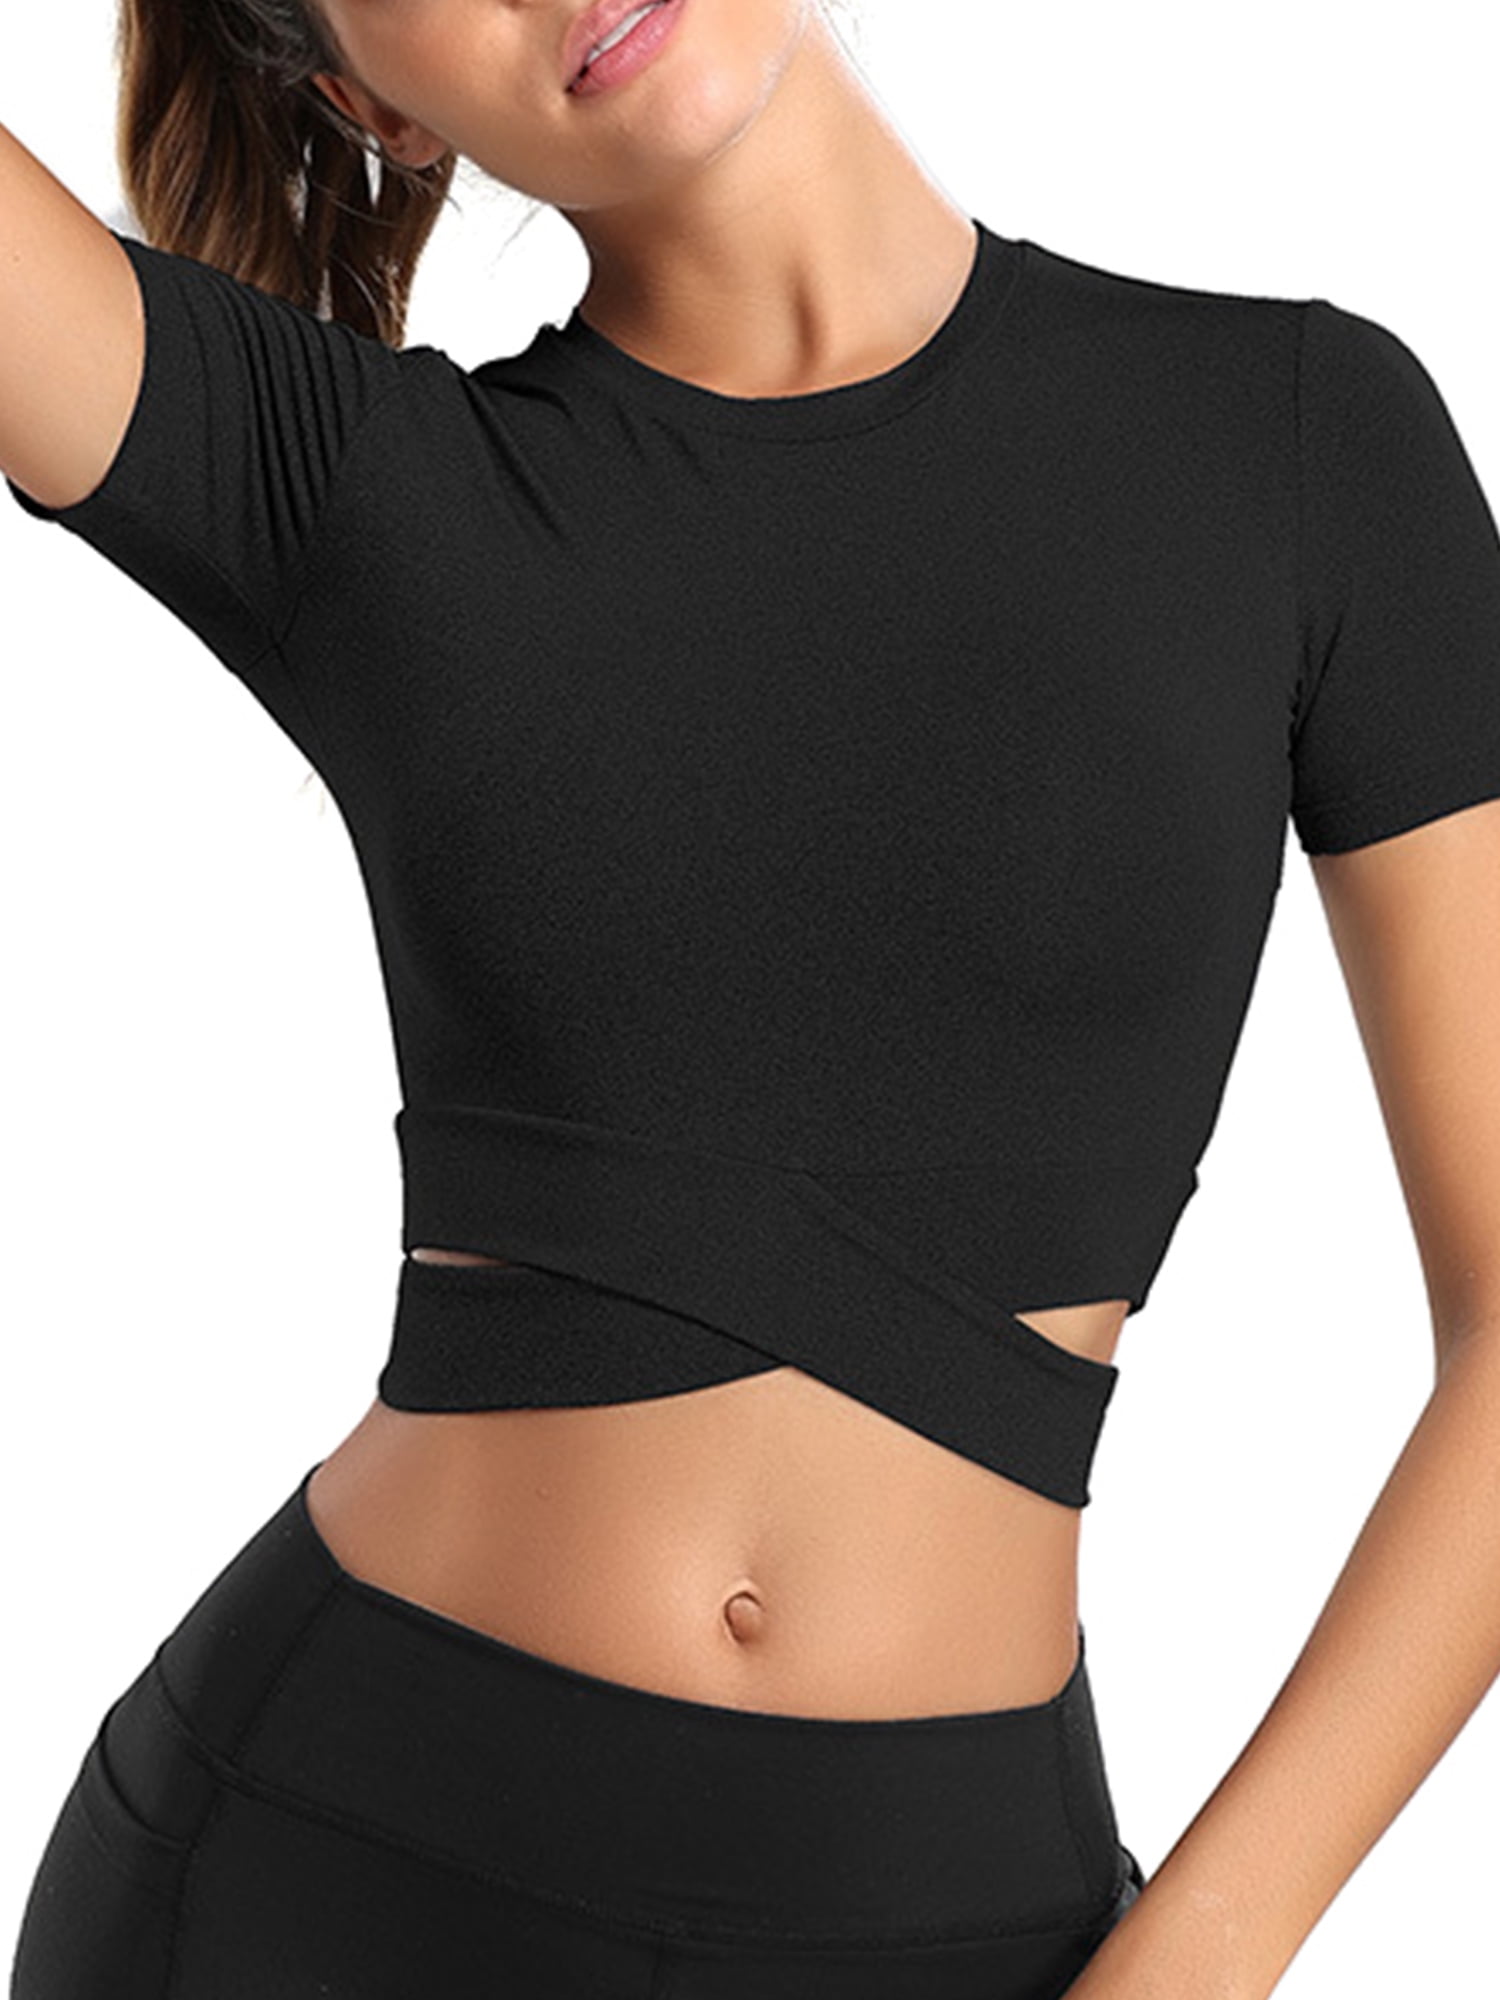 Women's Compression Workout Tops with Built-in Bra Short Sleeve Basic Crop  Top Tshirt Sports Fitness Tight Yoga Shirt